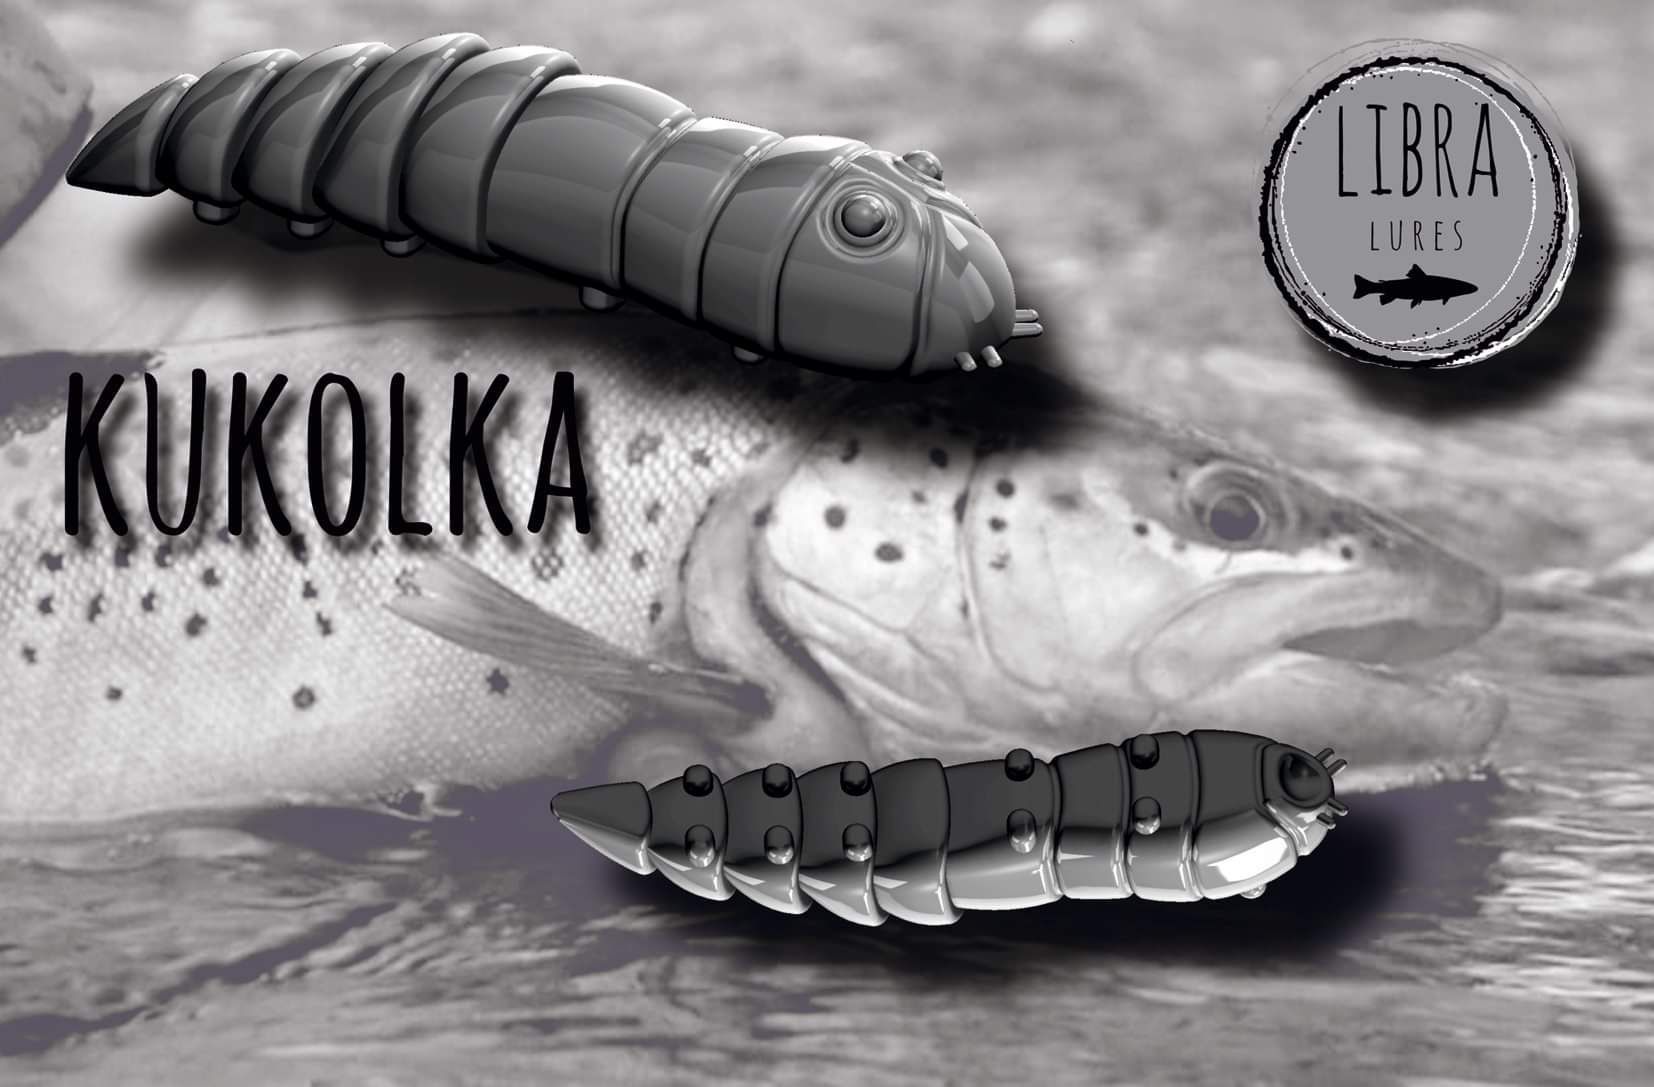 Libra Lures kukolka 27 mm 15 Piece Color 004 Silver Pearl